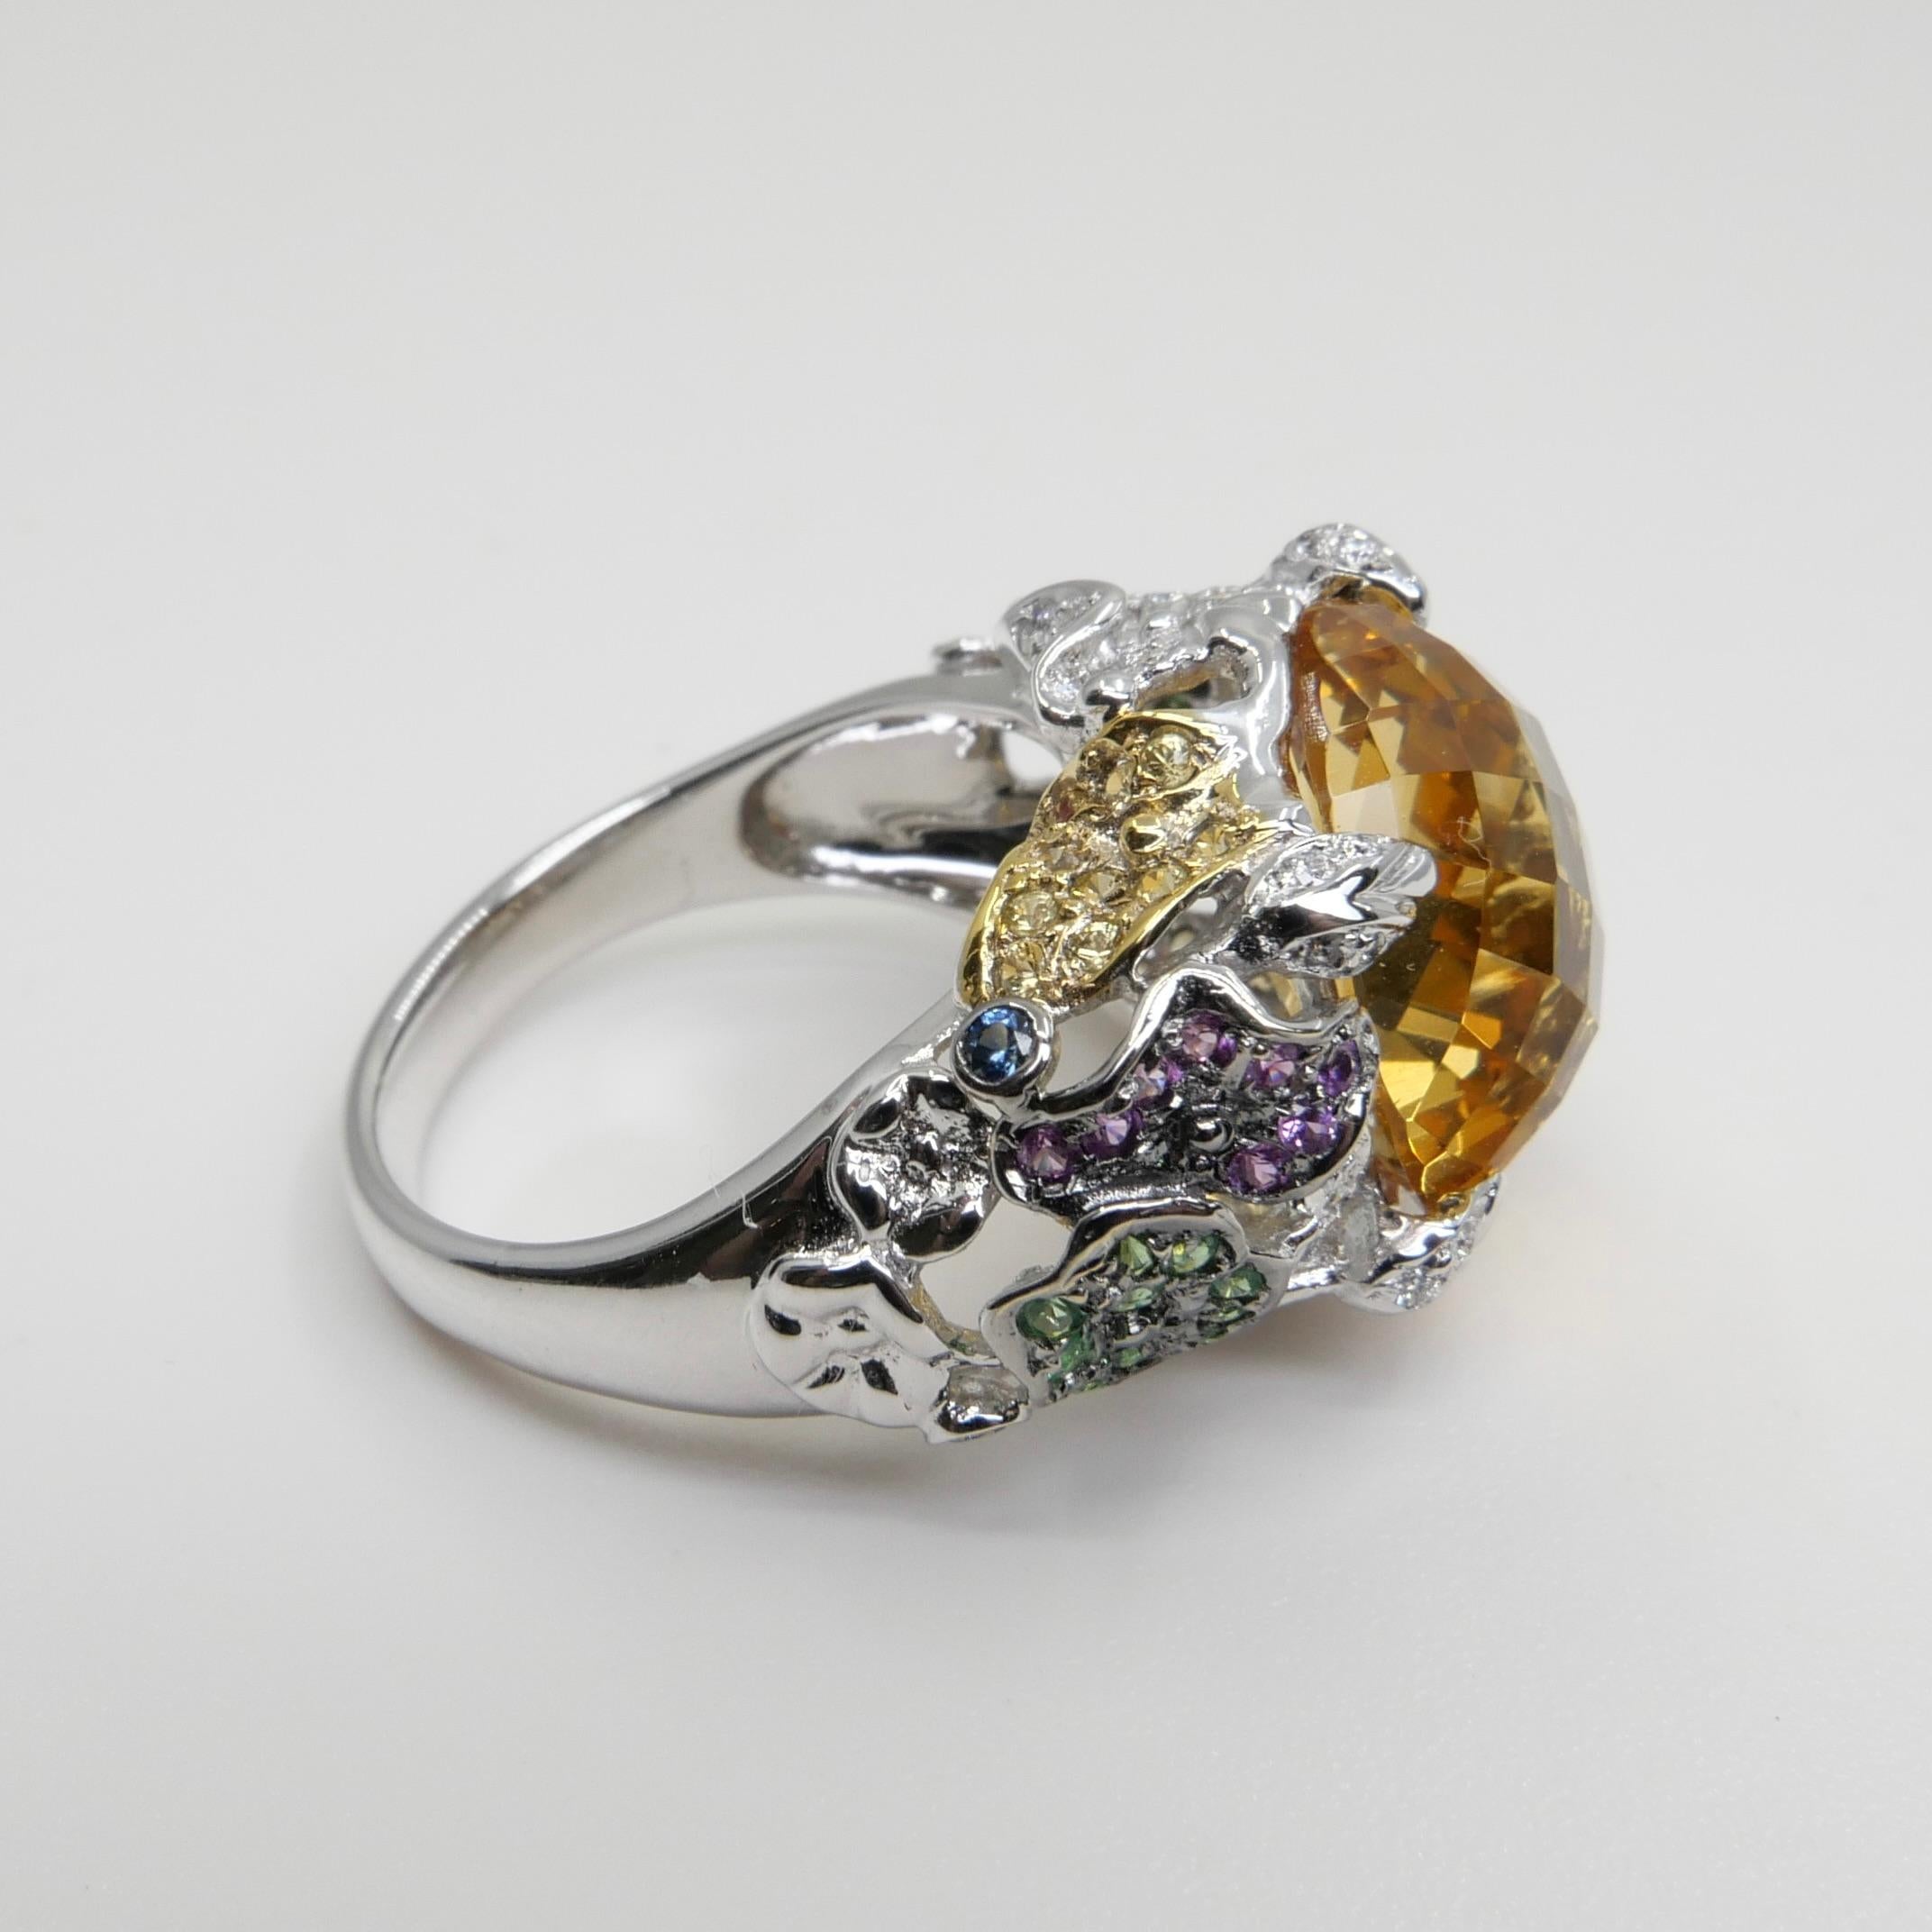 Checker Cut Yellow Topaz, Diamond & Colored Gemstones Cocktail Ring, Colorful For Sale 8